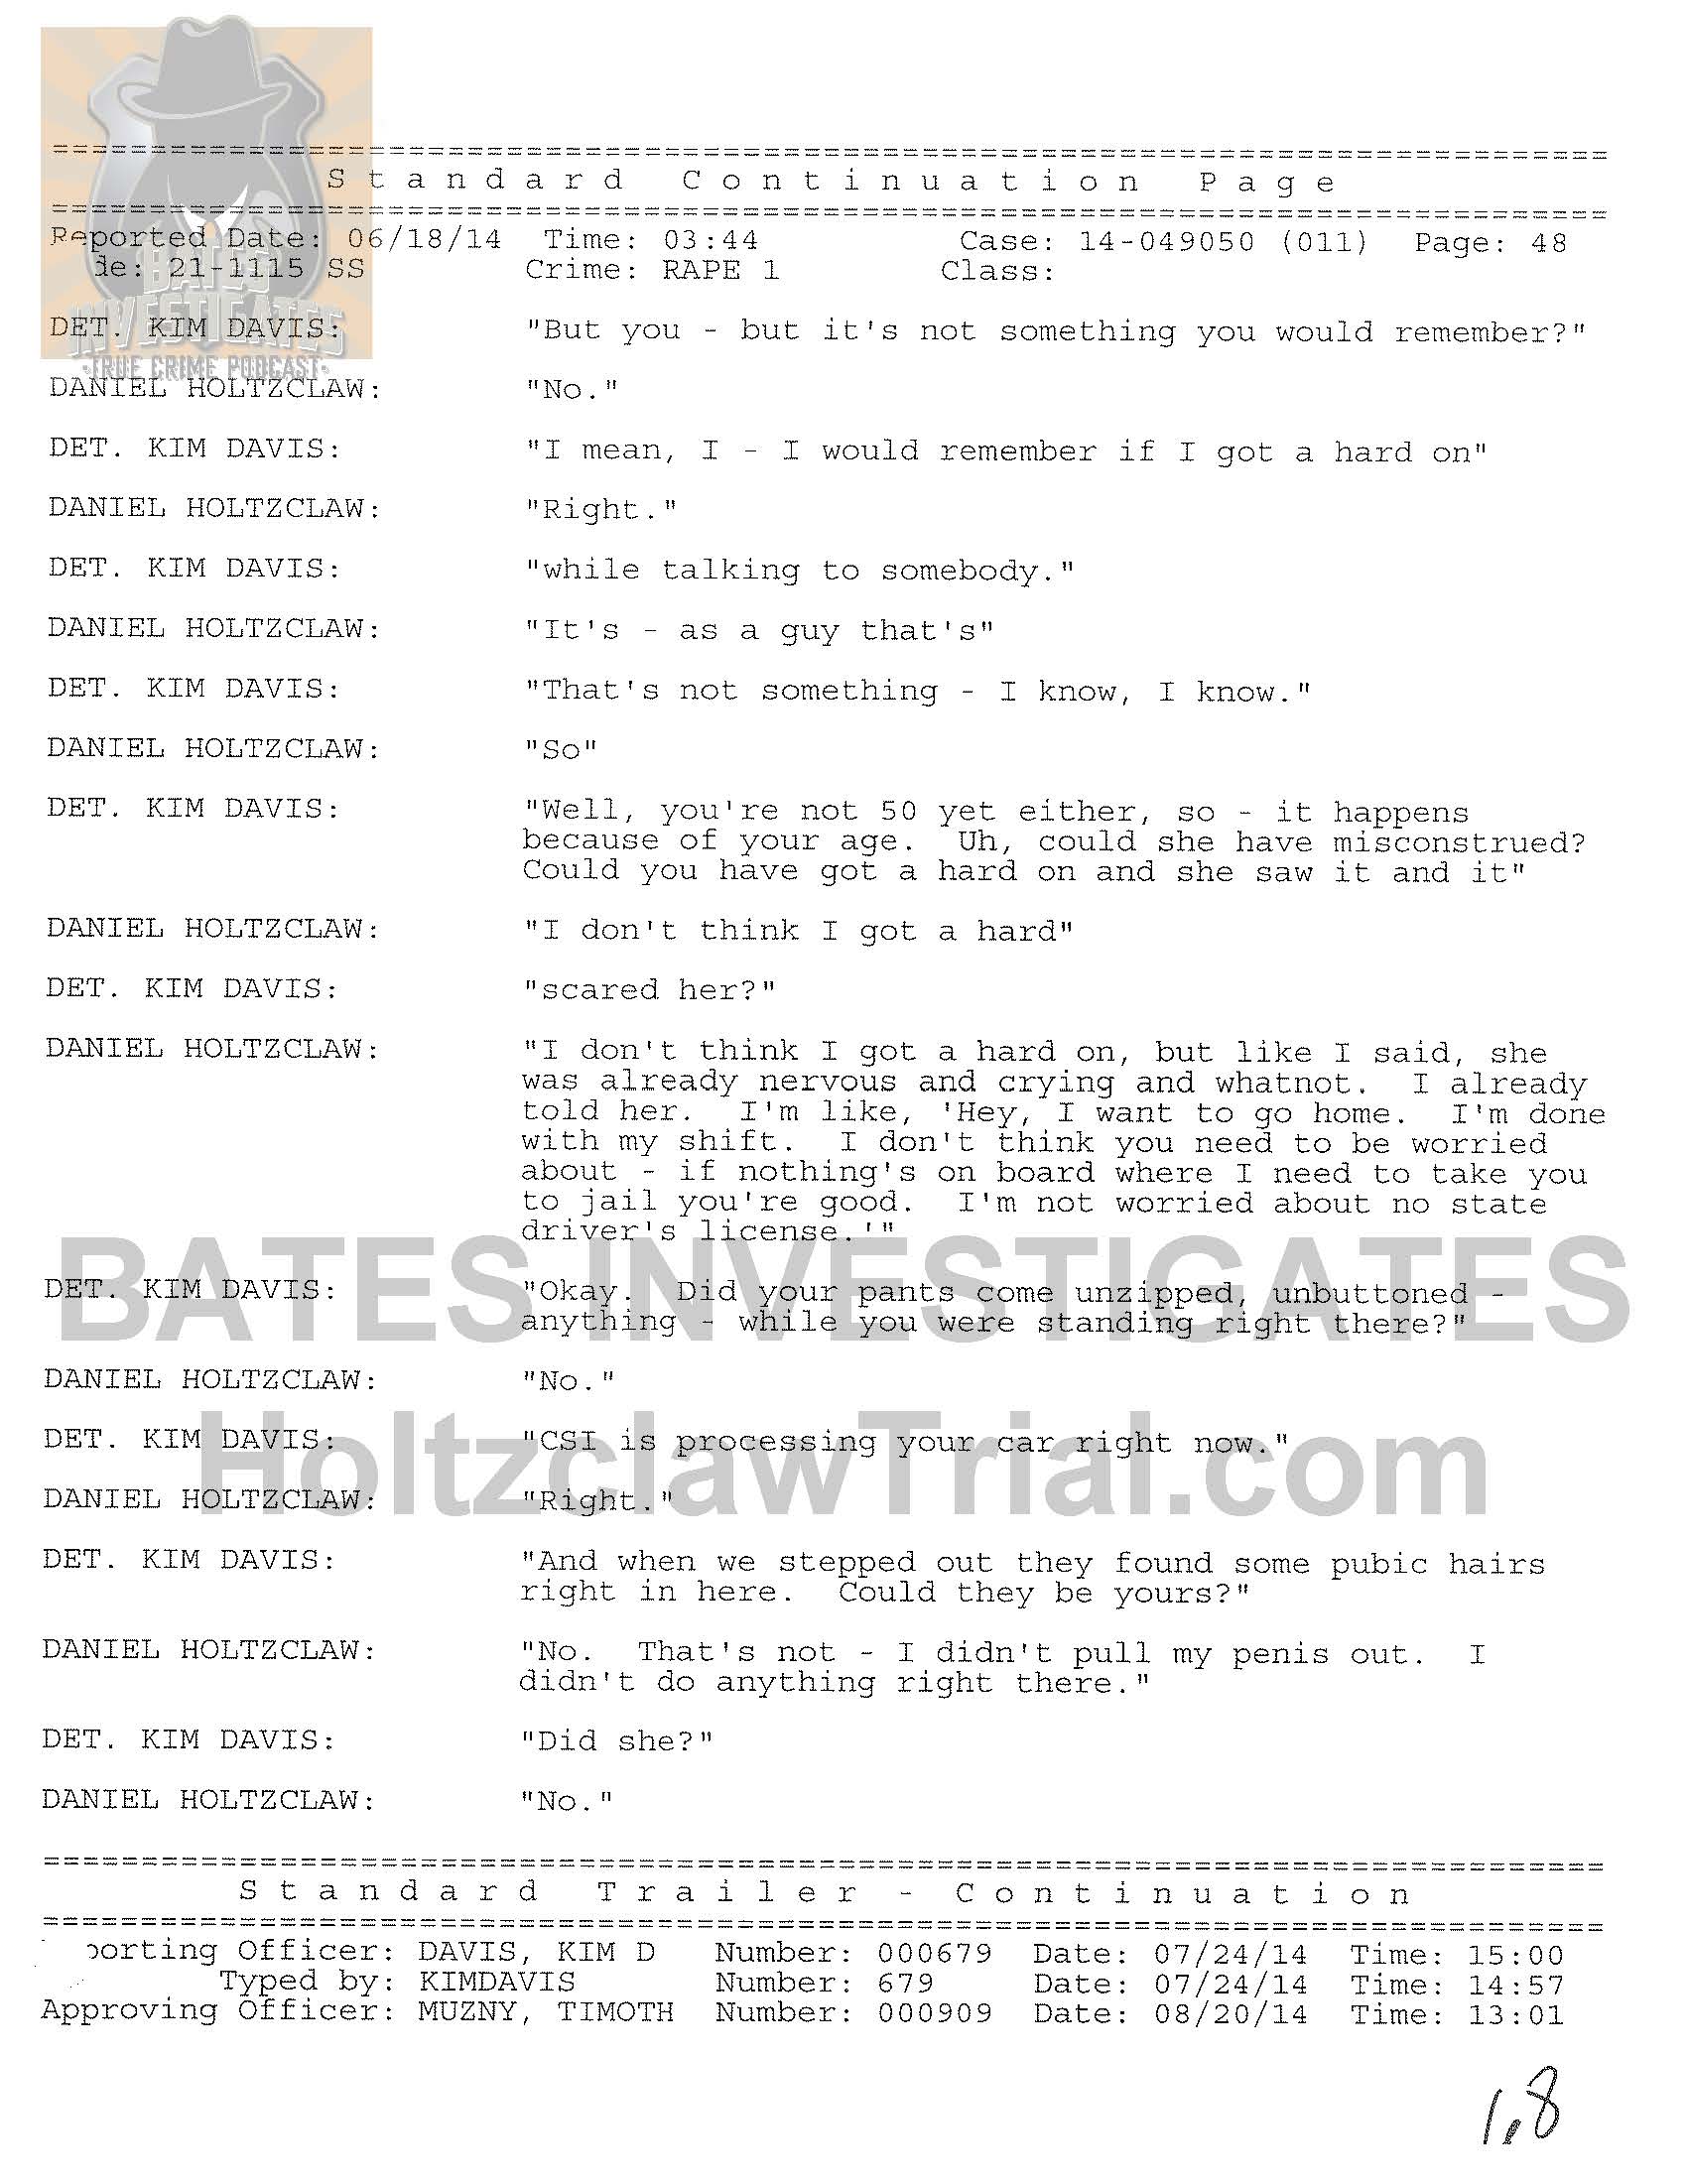 Holtzclaw Interrogation Transcript - Ep02 Redacted_Page_48.jpg